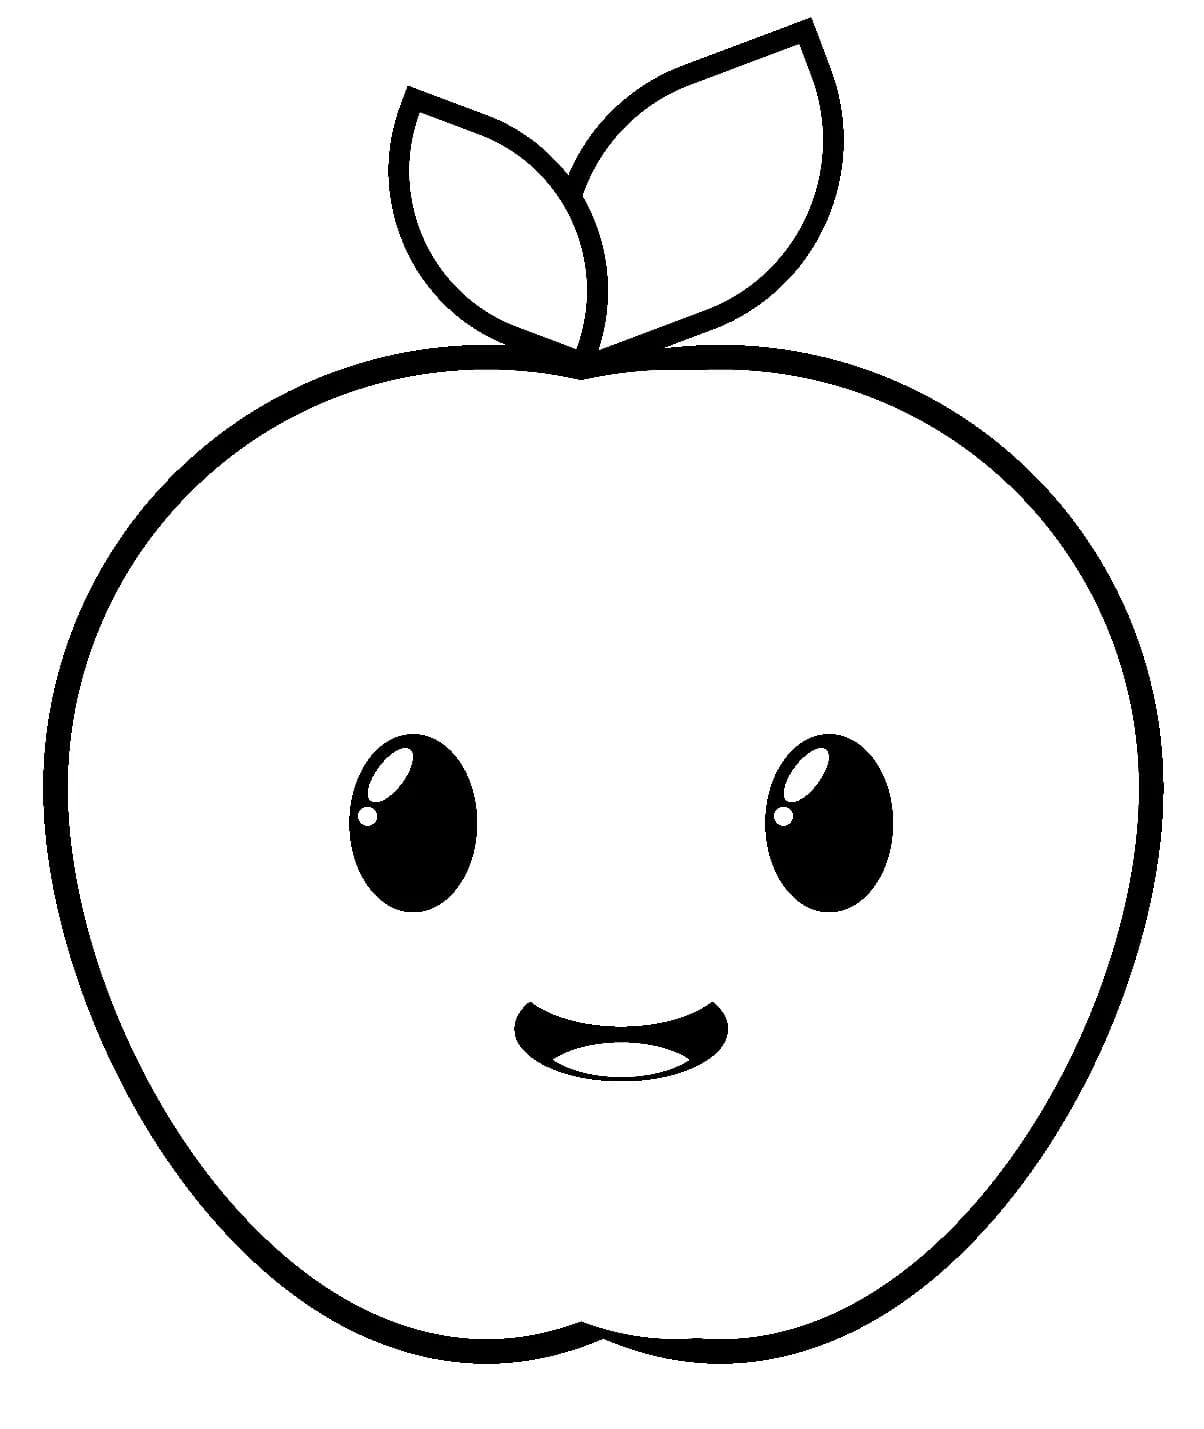 printable-cute-apple-coloring-page-download-print-or-color-online